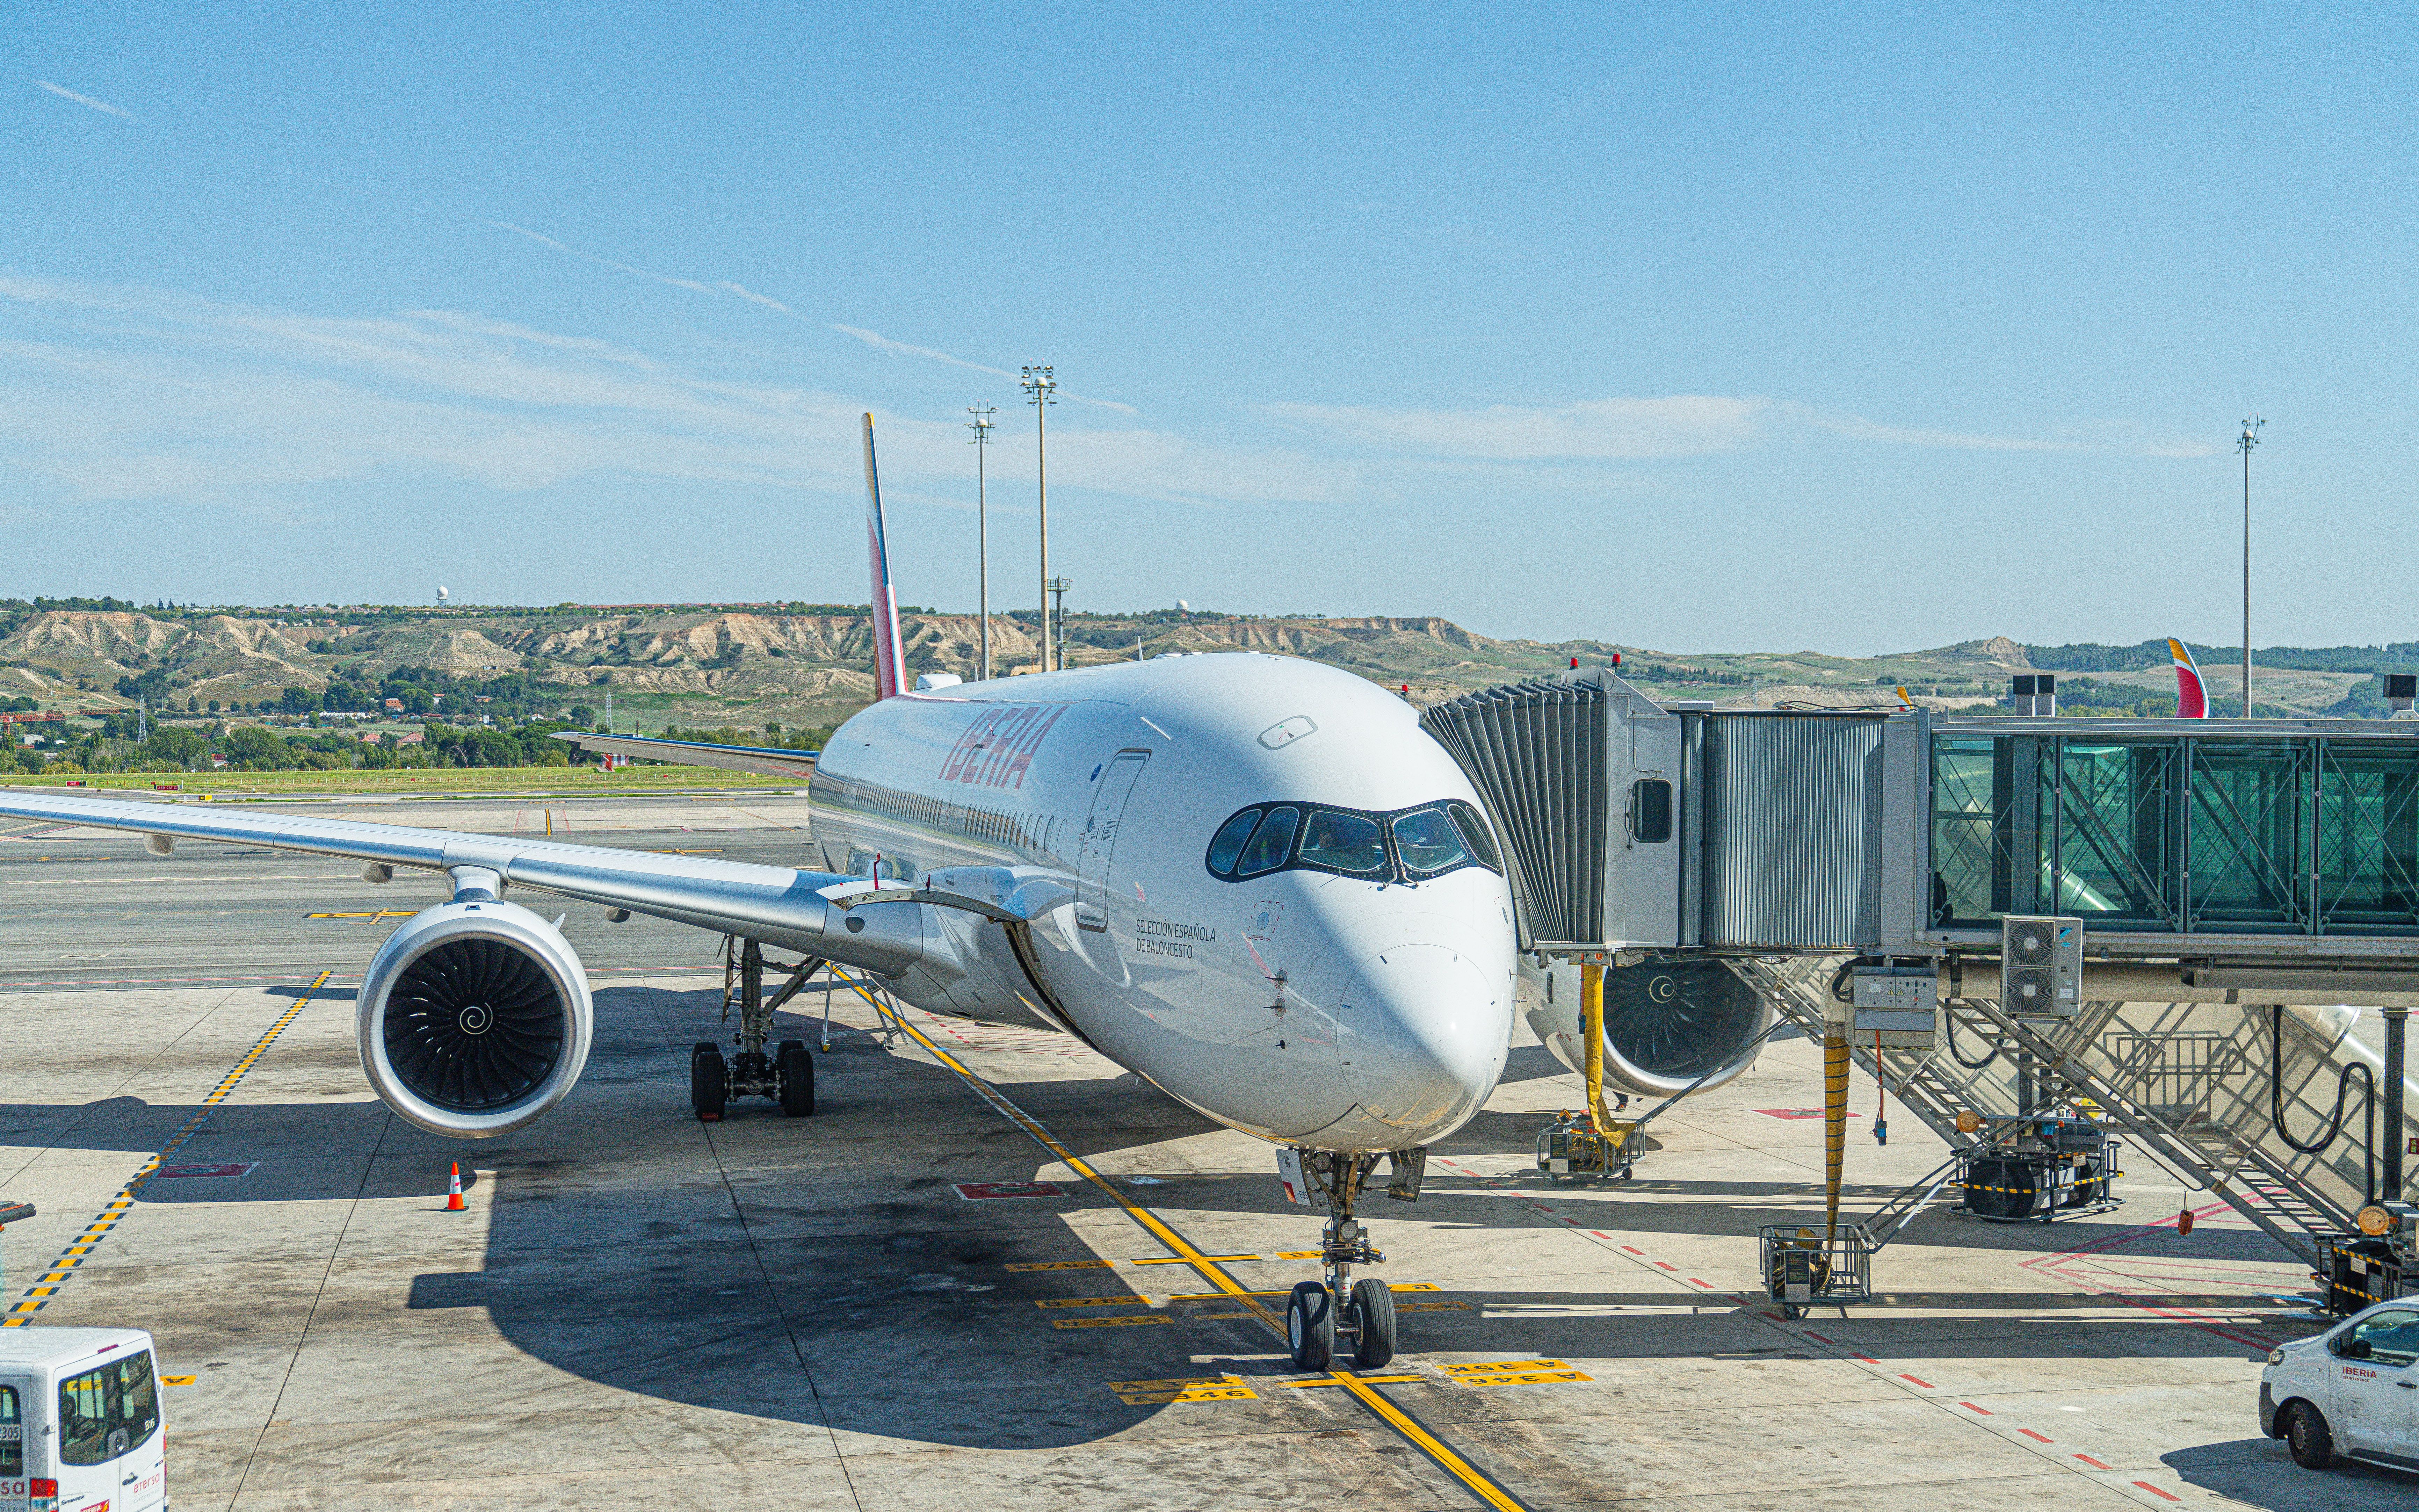 An Iberia Aircraft on the apron parked at a gate.